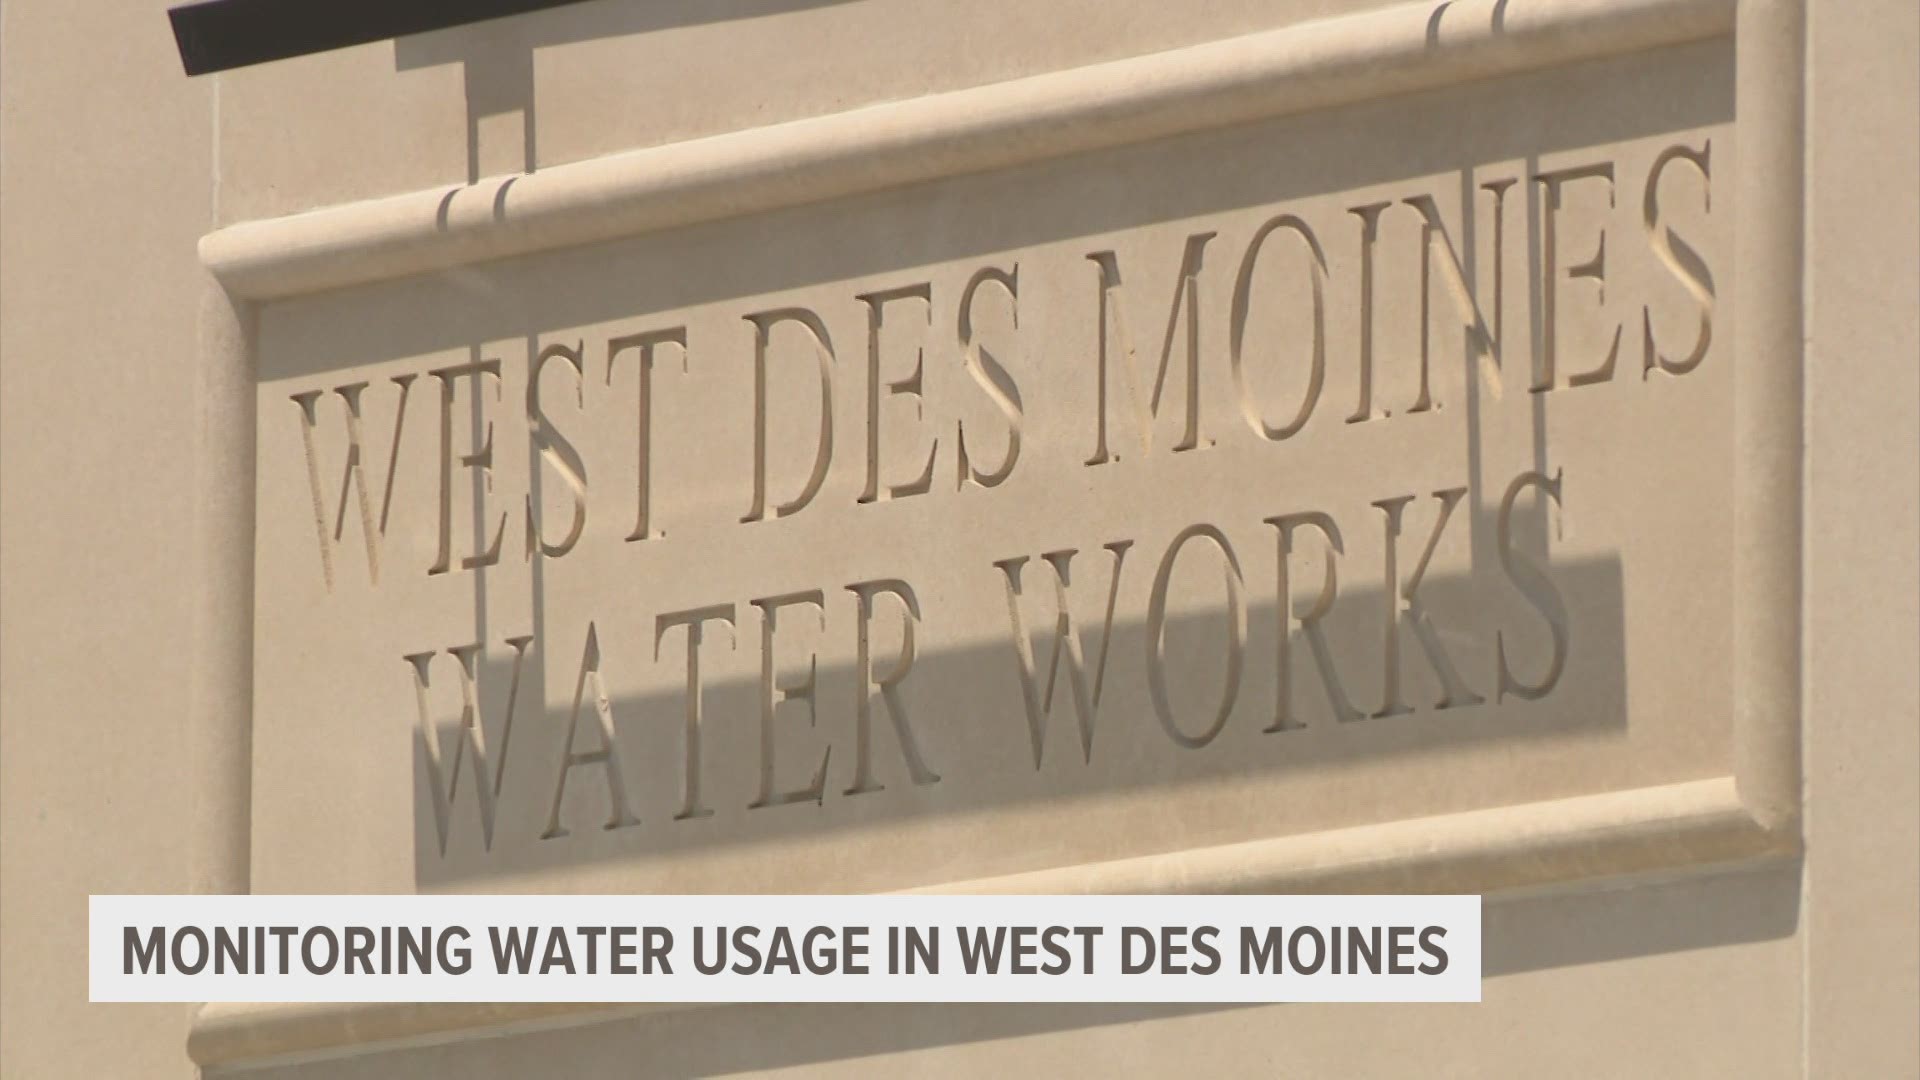 West Des Moines Water Works says they've seen a slight reduction in water usage, but it's less than they'd like.